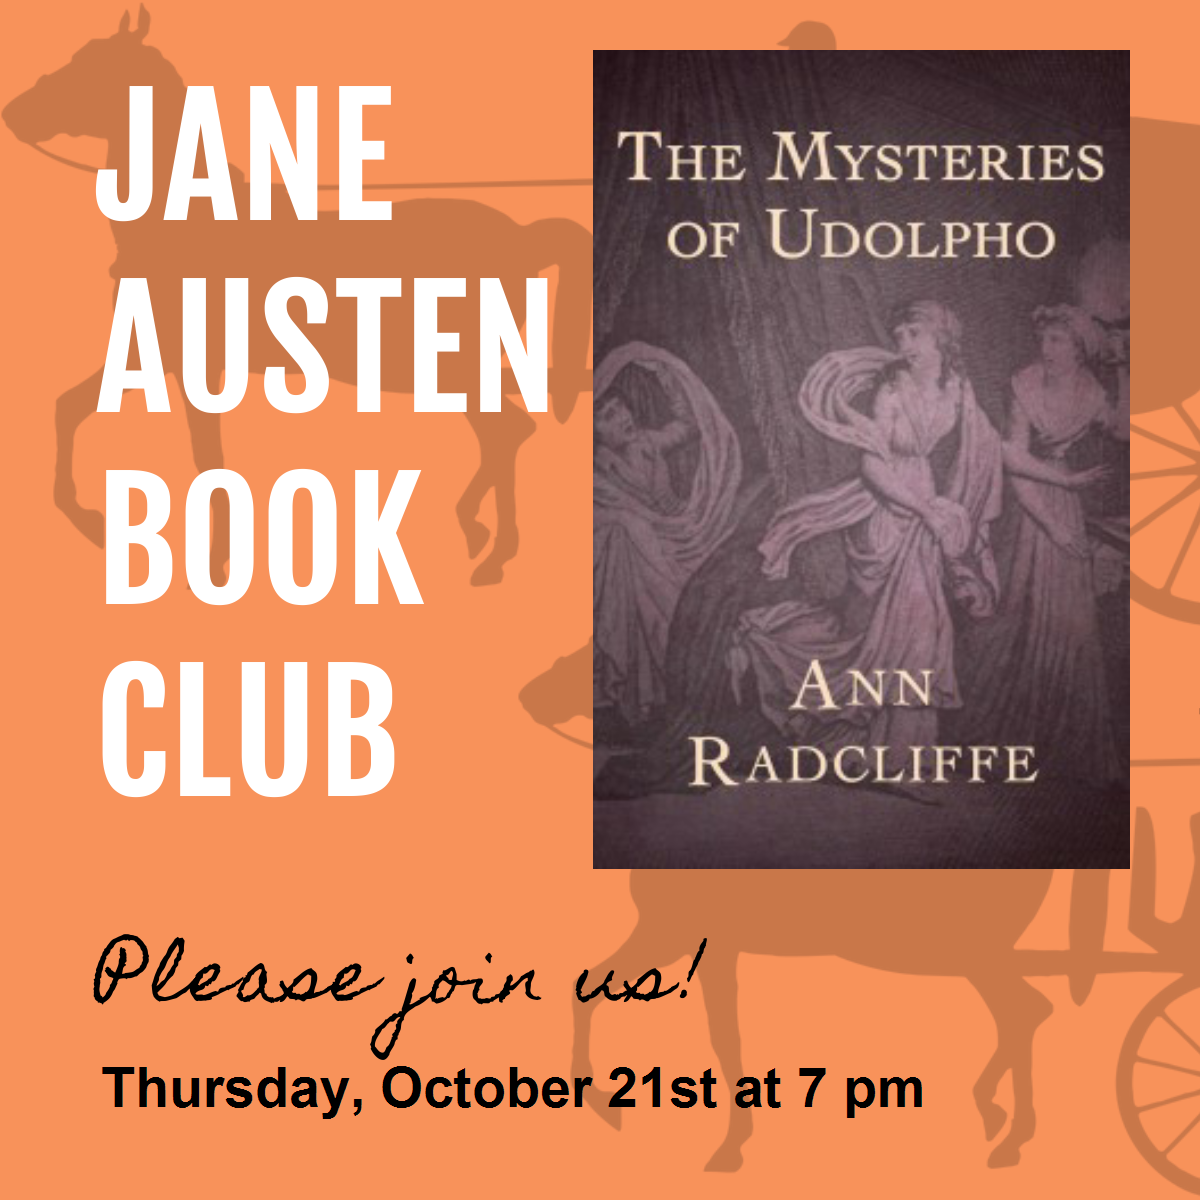 Jane Austen Book Club The Mysteries of Udolpho